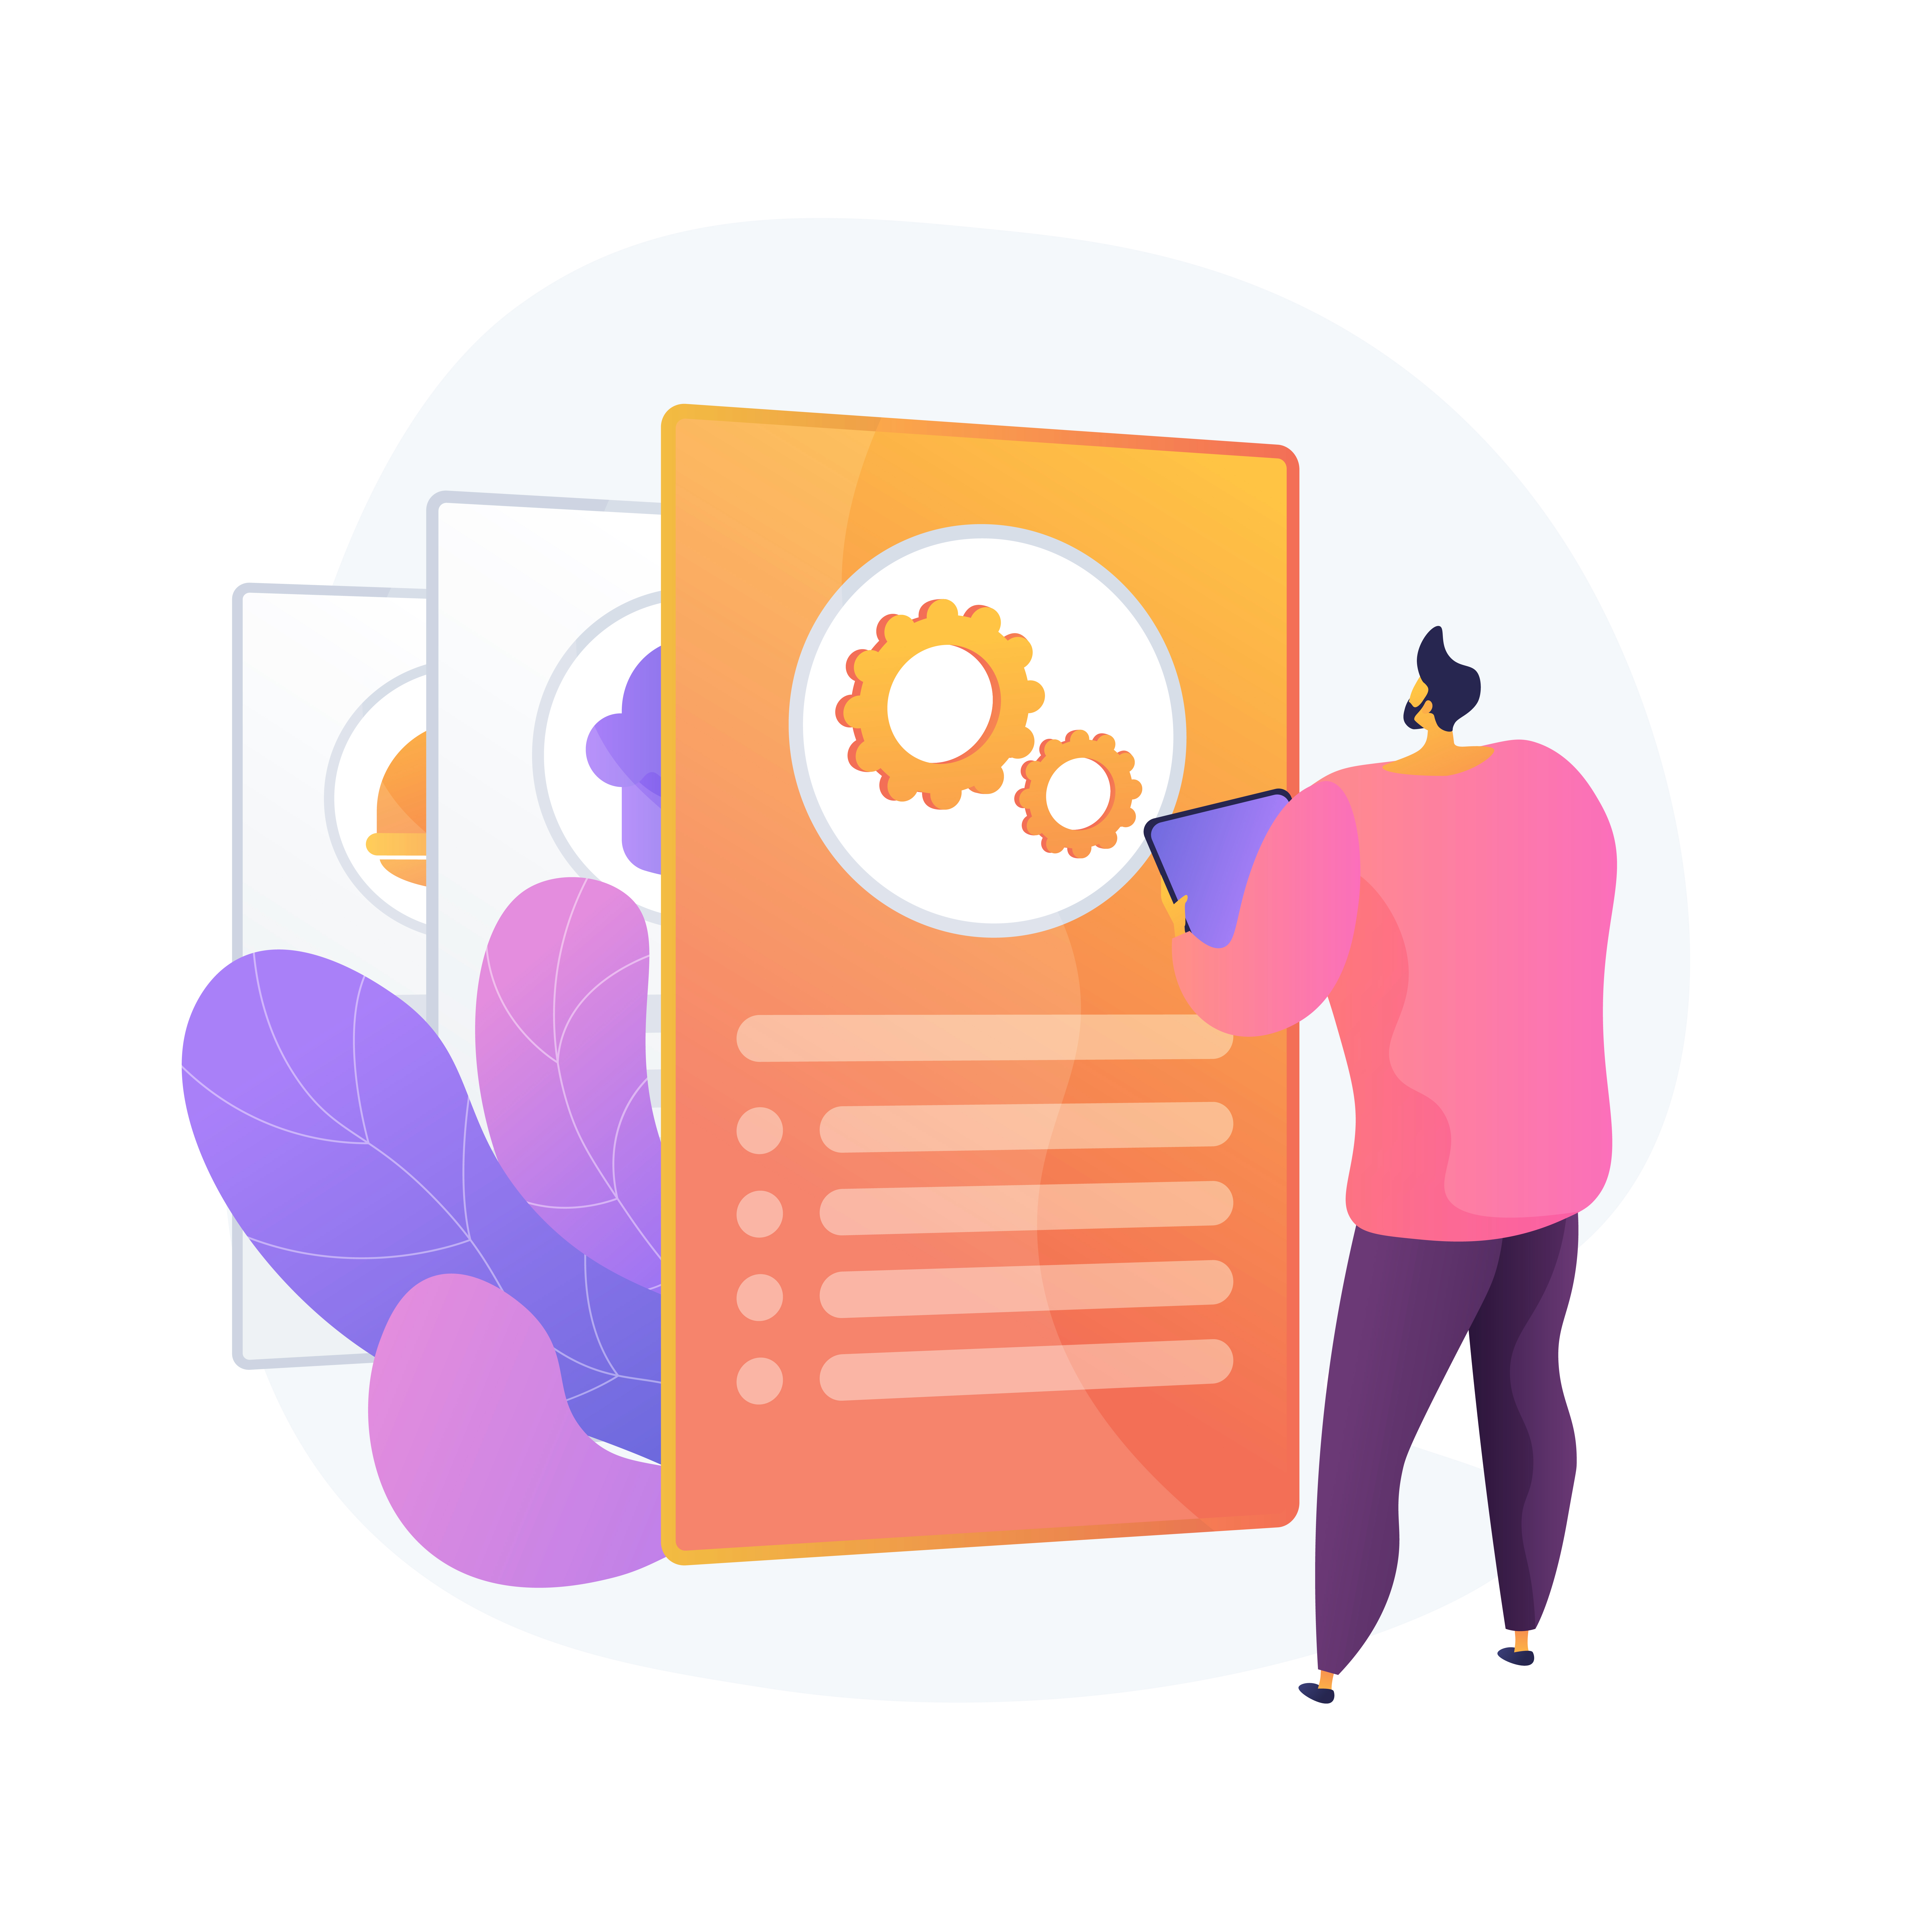 Instruction manual, guide. Document with cogwheel isolated design element. Male character analyzing file. Business analysis, data processing, updating. Vector isolated concept metaphor illustration